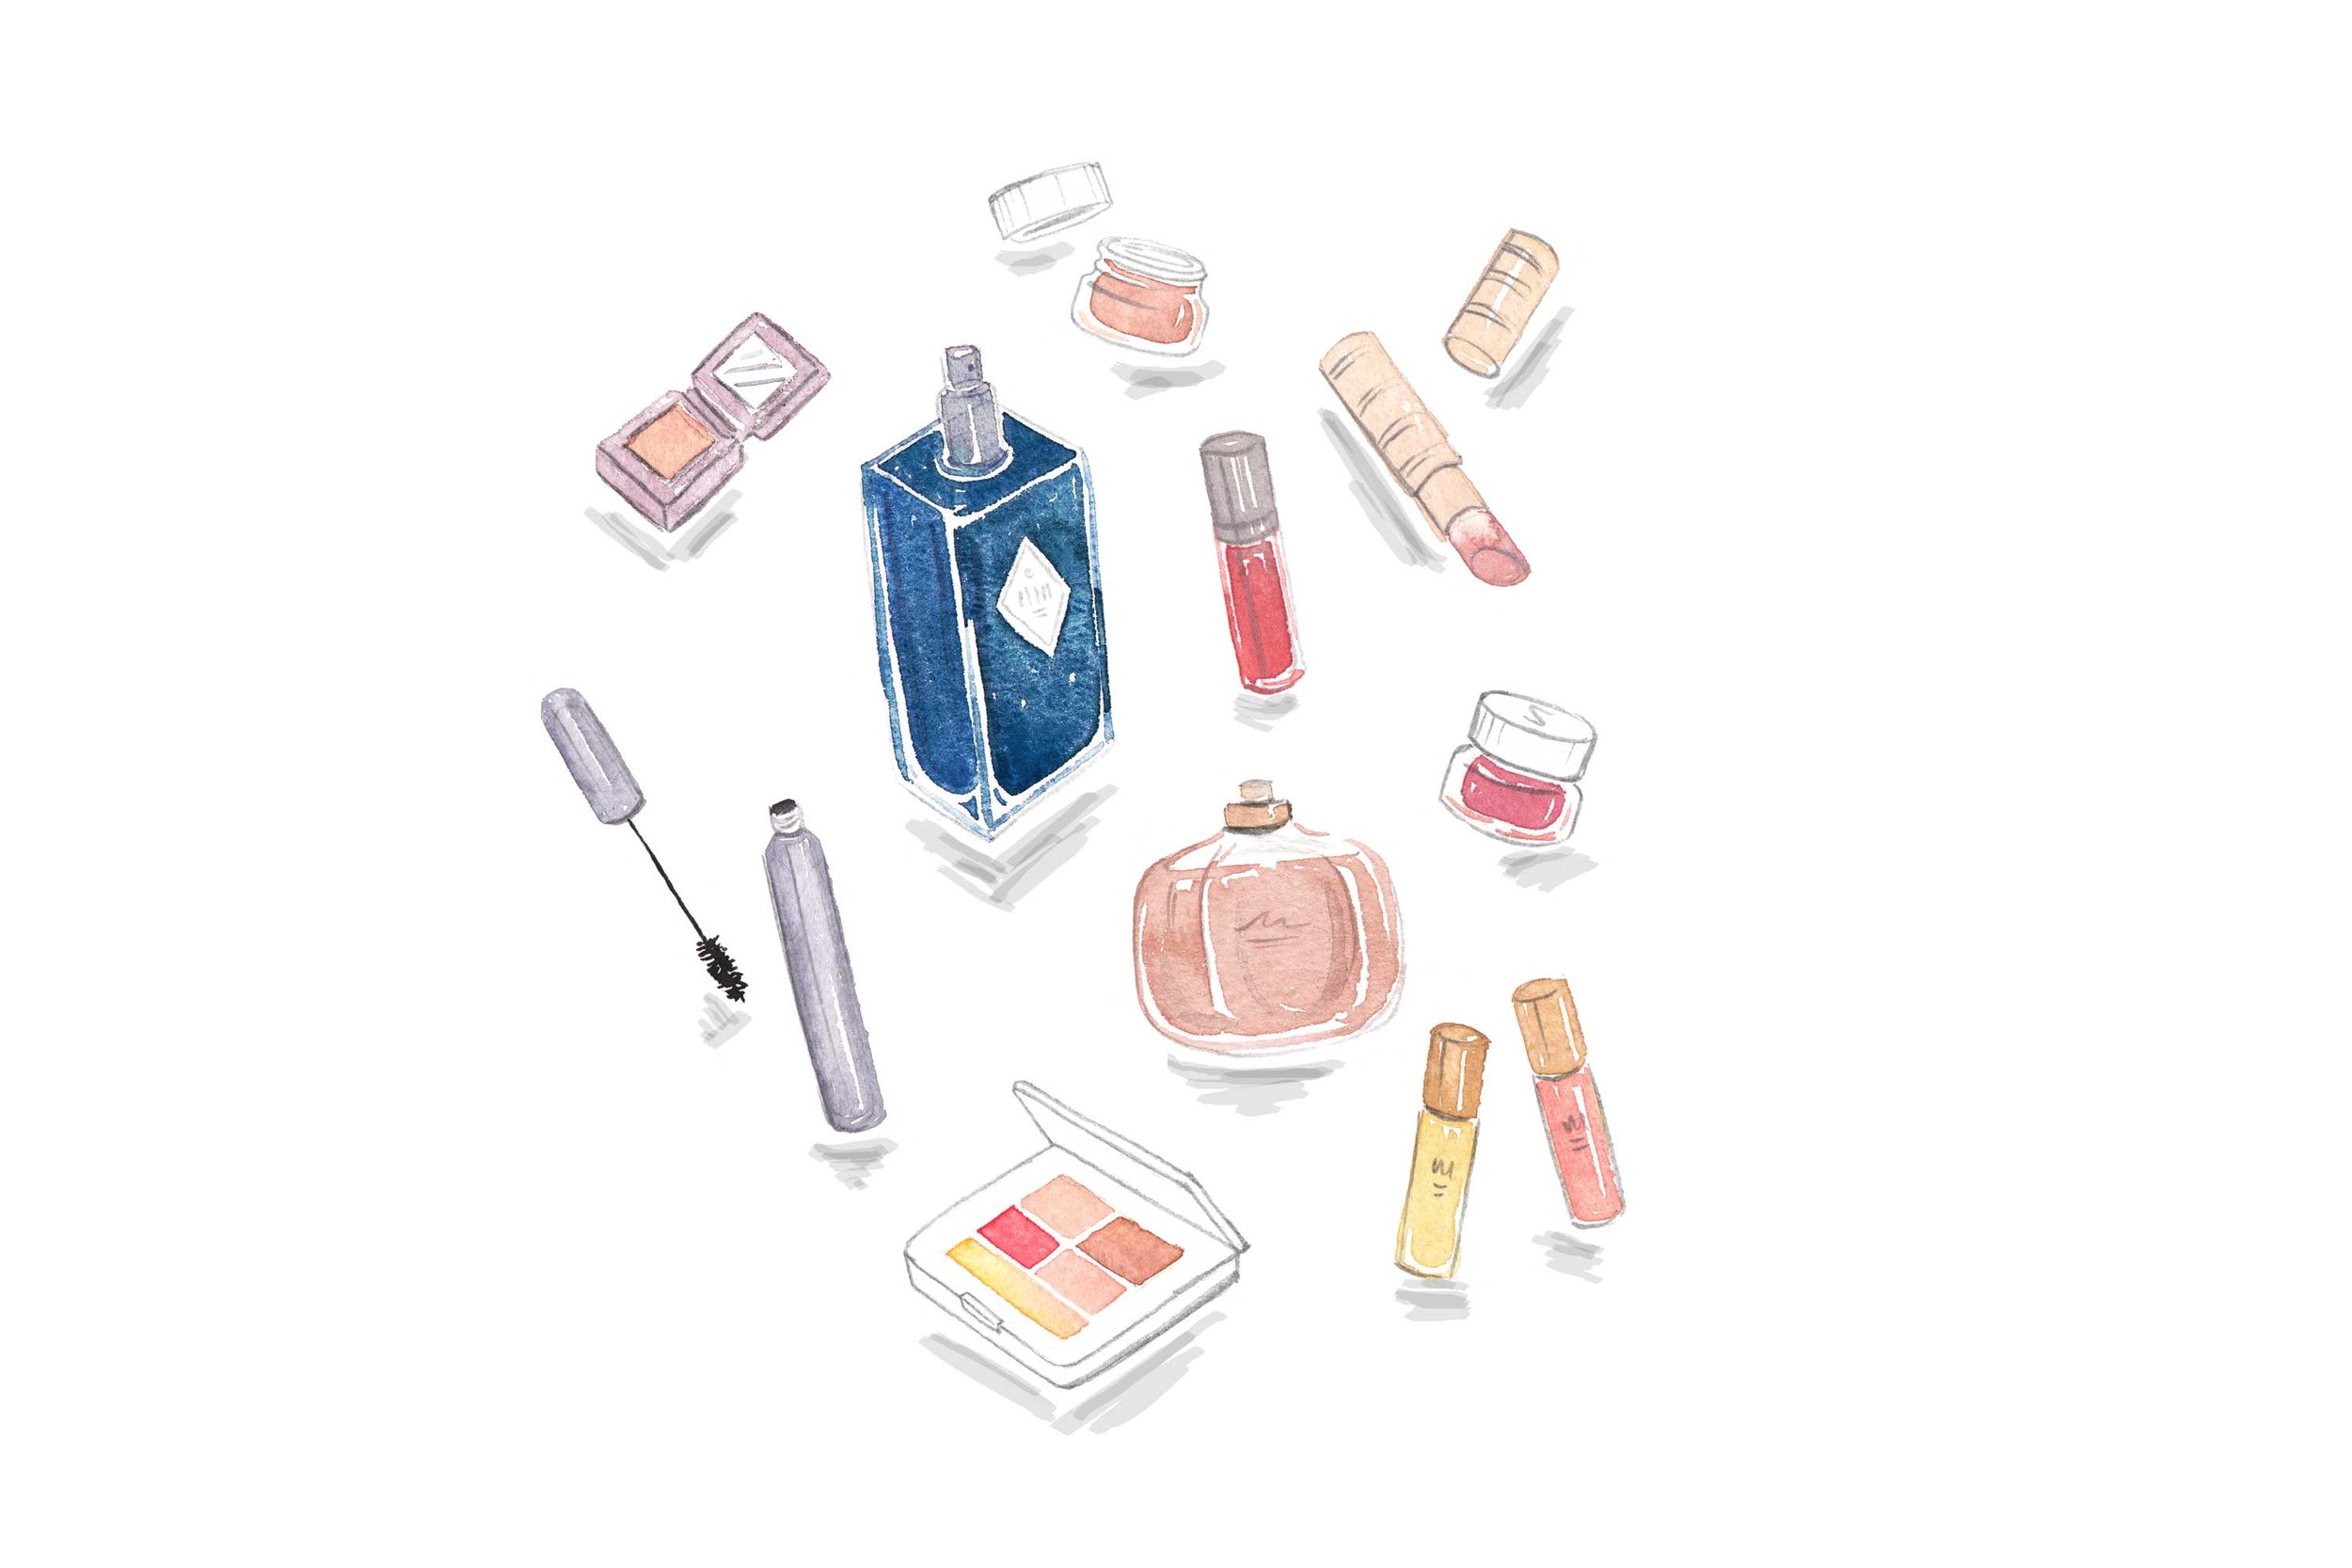 erin-ellis_lifestyle_watercolor_illustrations_beauty_products_well+good.jpg